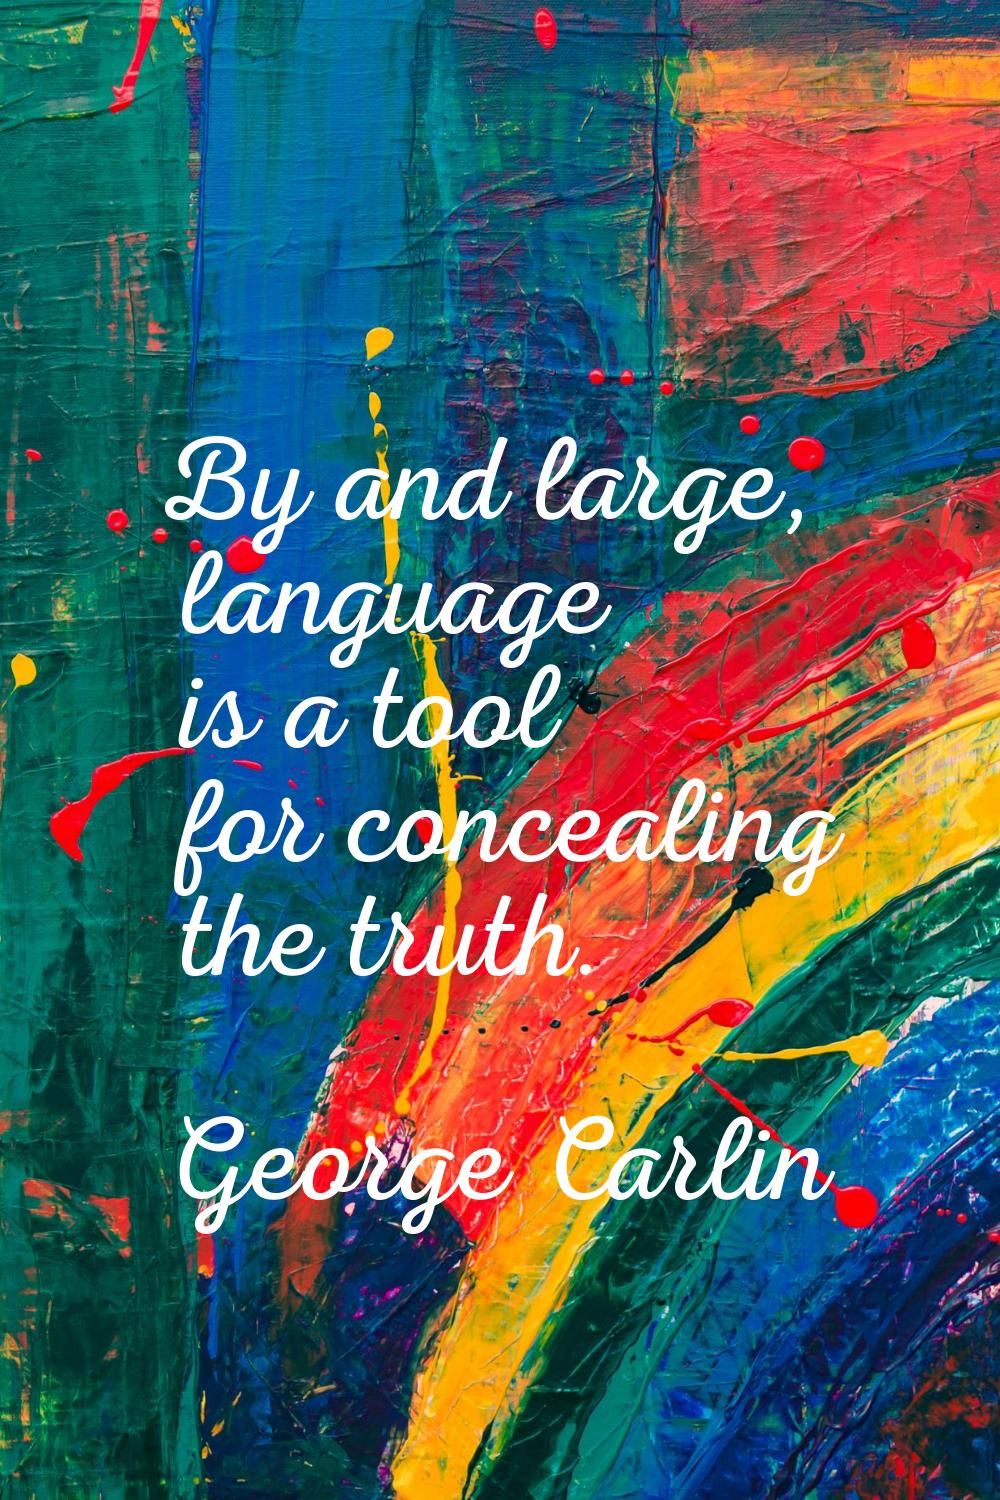 By and large, language is a tool for concealing the truth.